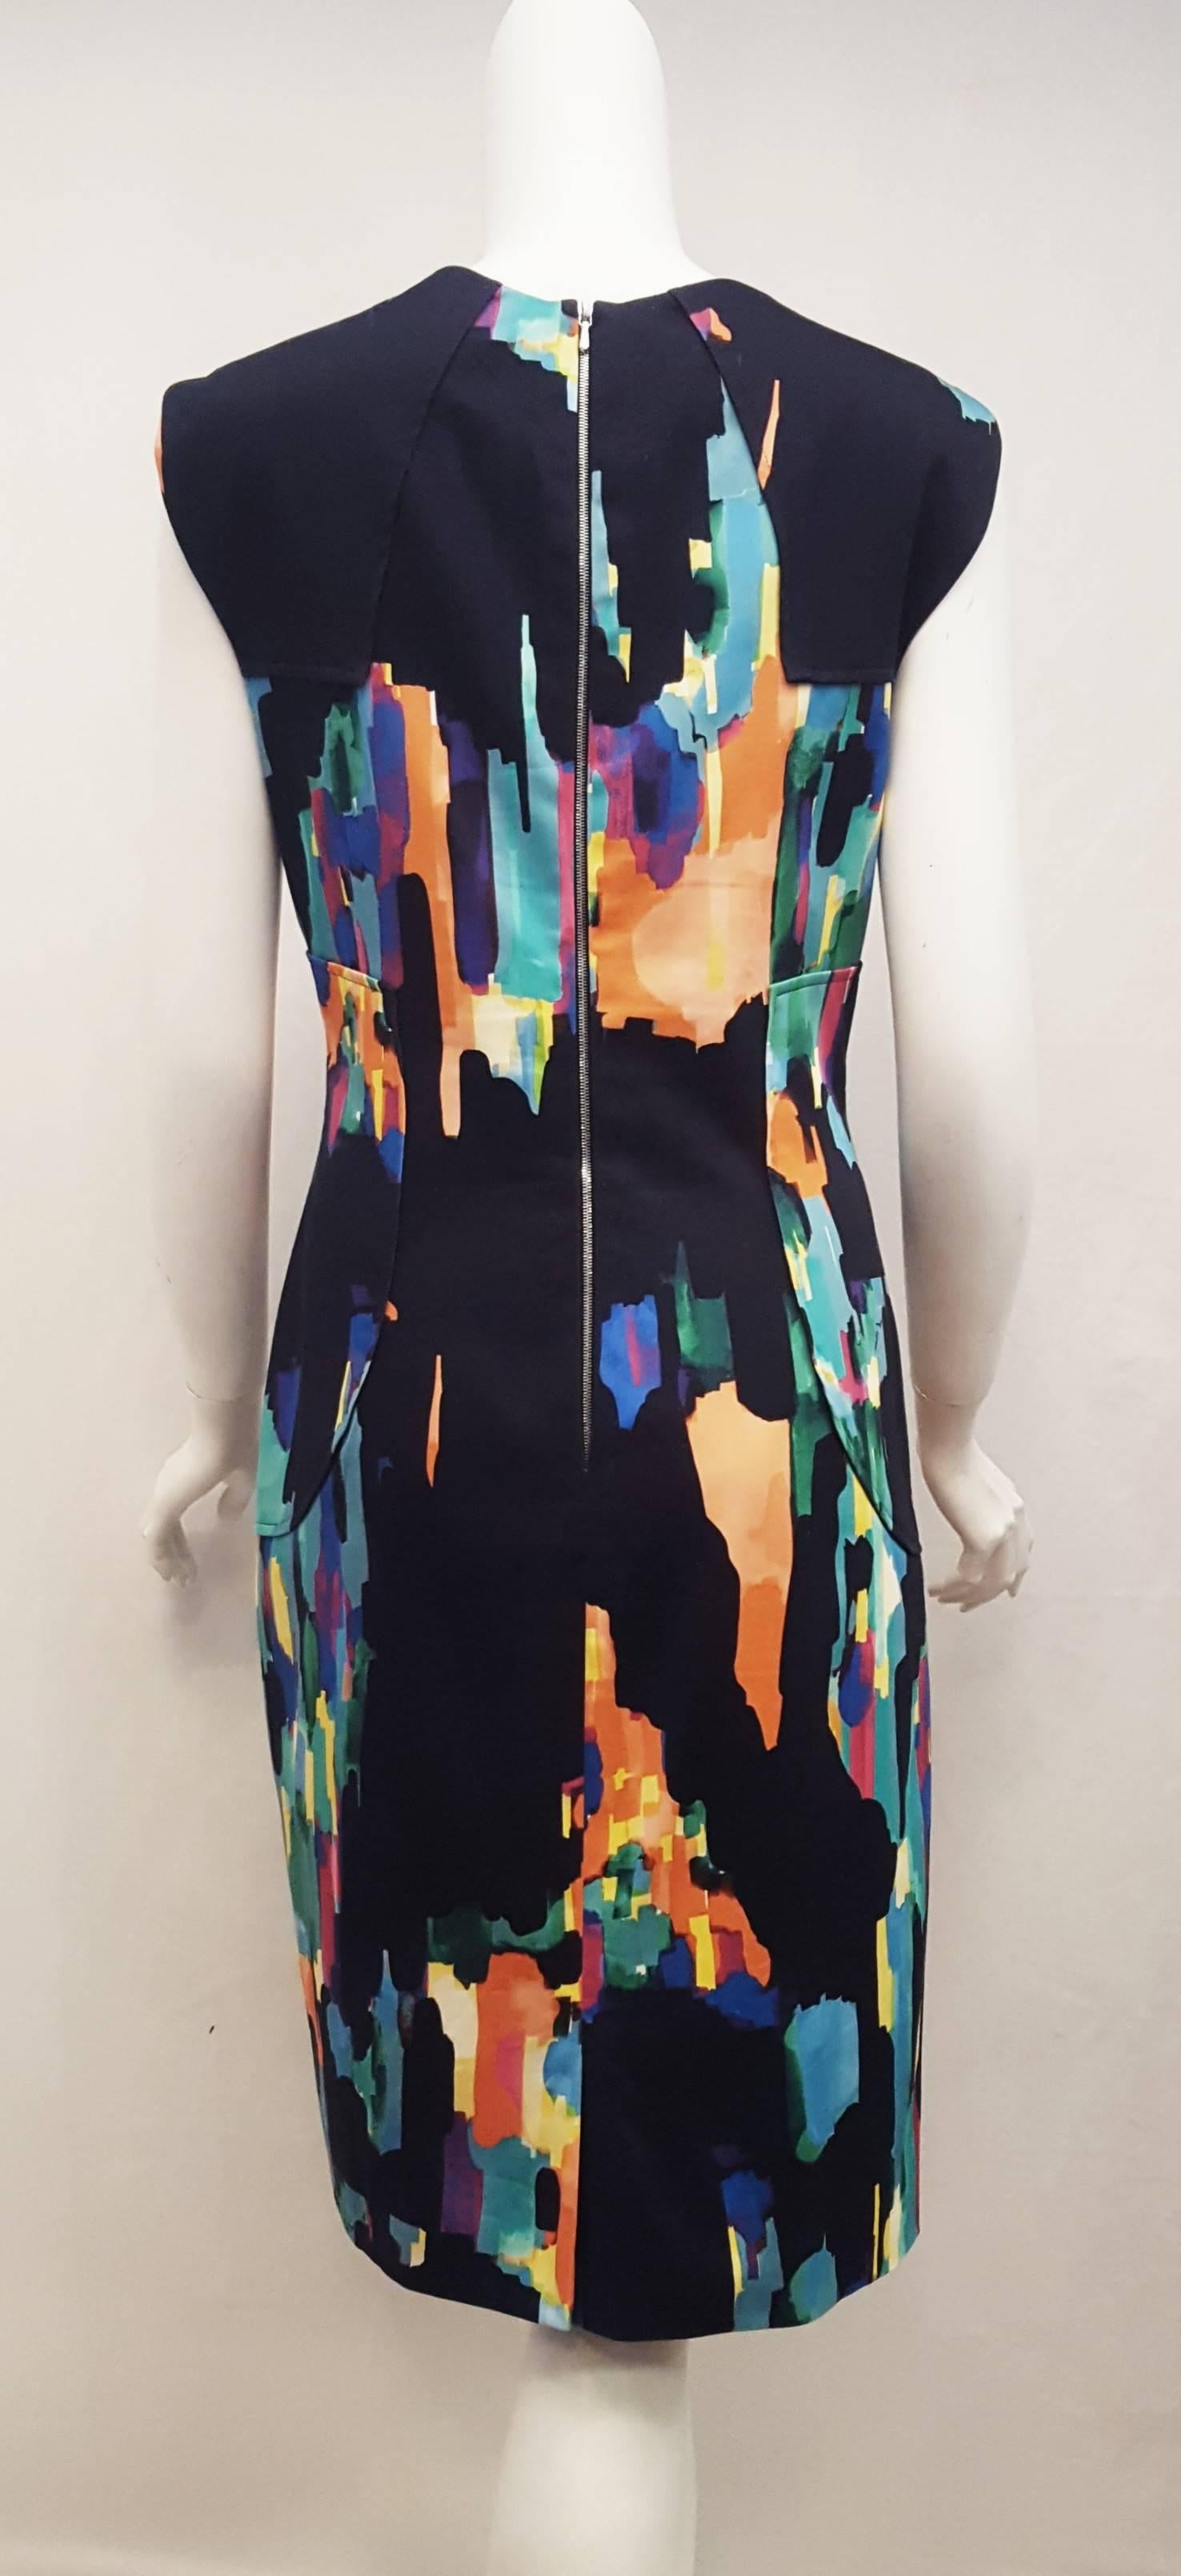 Lela Rose Multi Primary Colors Black Base Sleeveless Dress In Excellent Condition For Sale In Palm Beach, FL